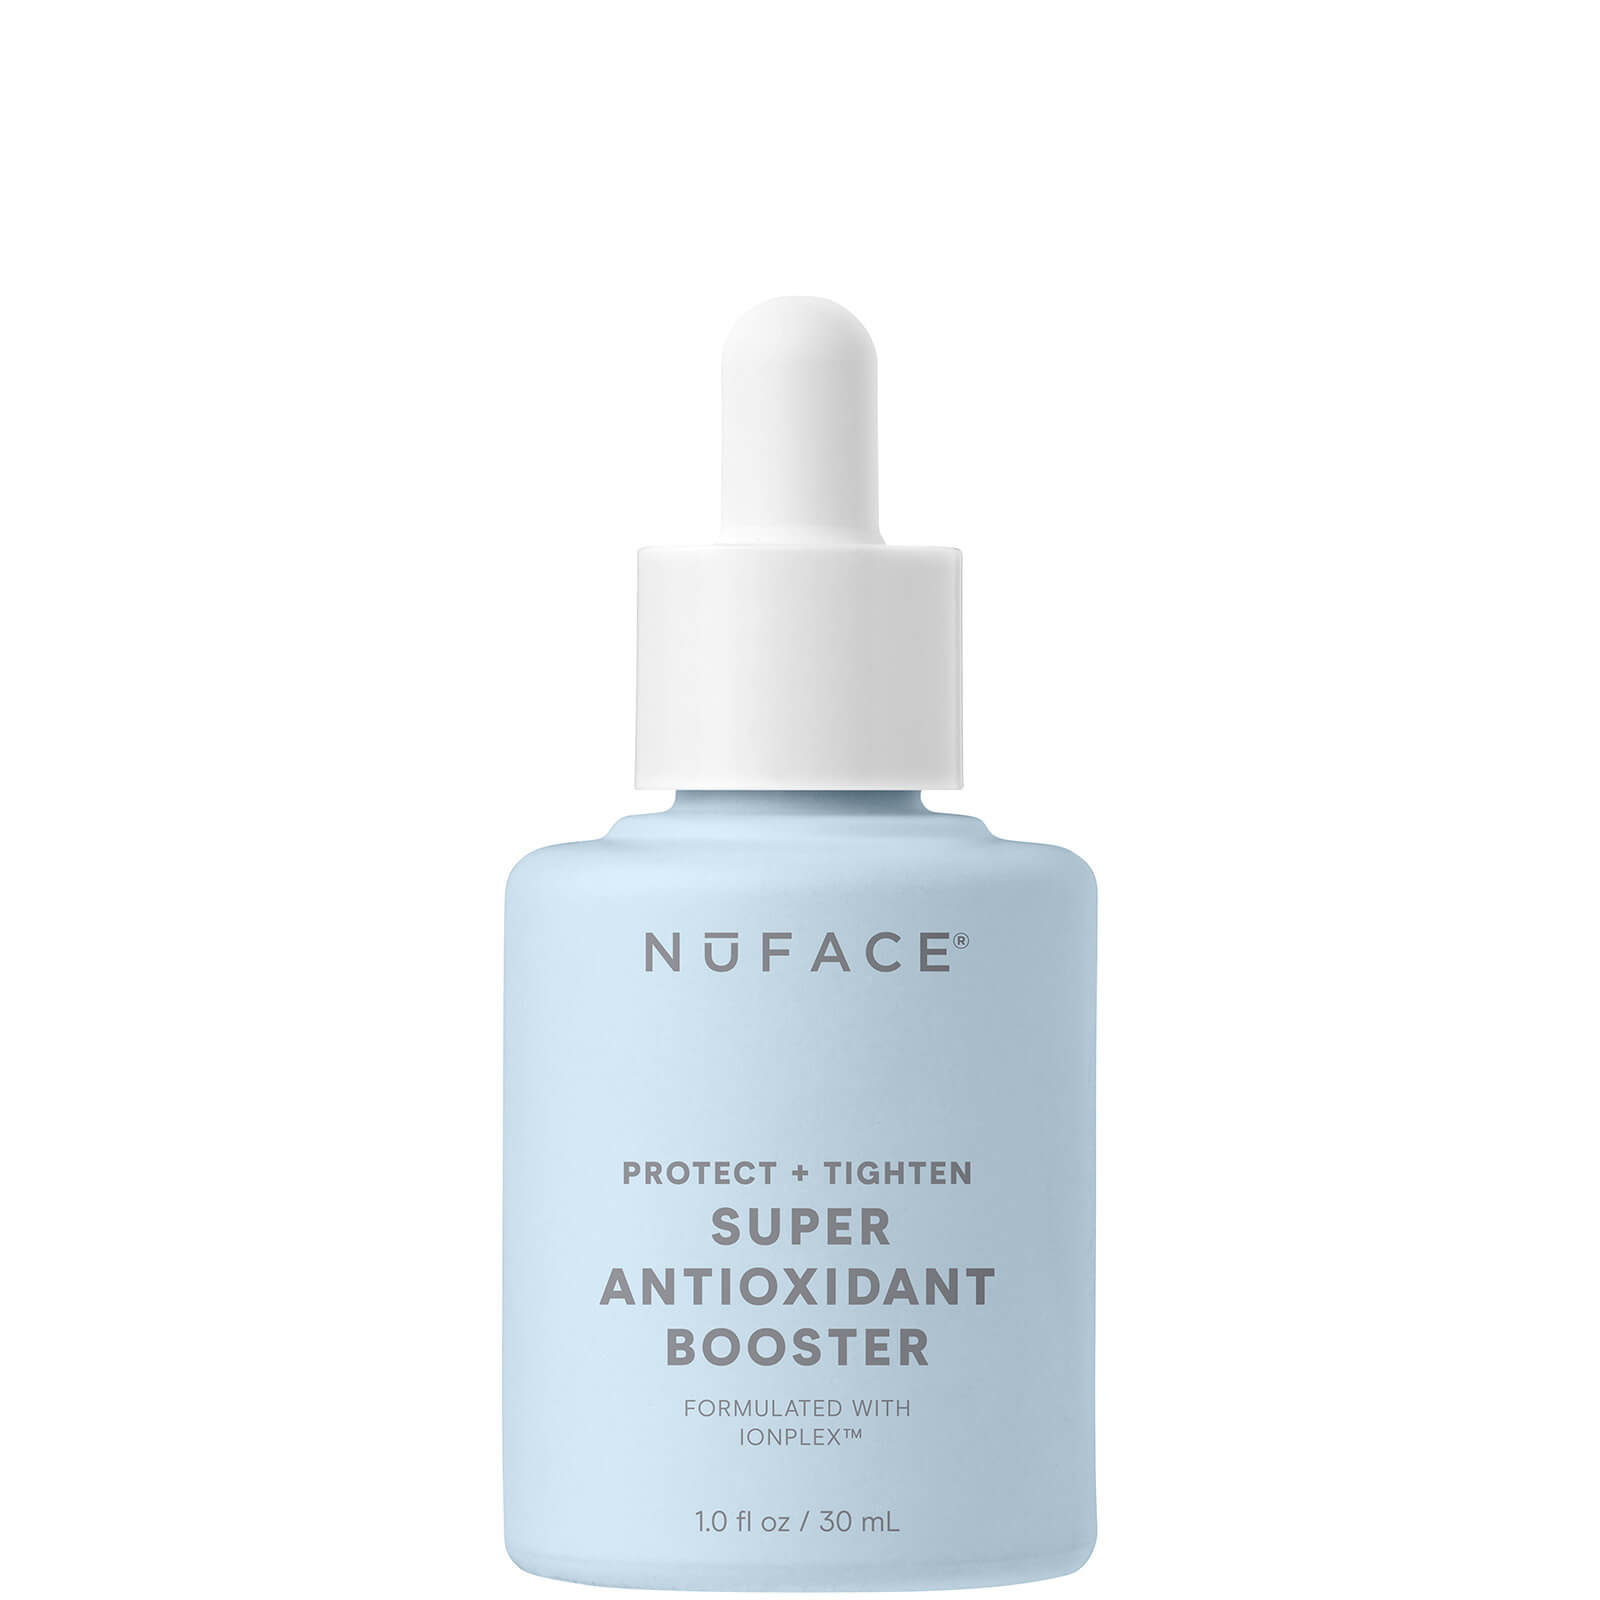 NuFACE Protect and Tighten Super Antioxidant Booster Siero 30ml